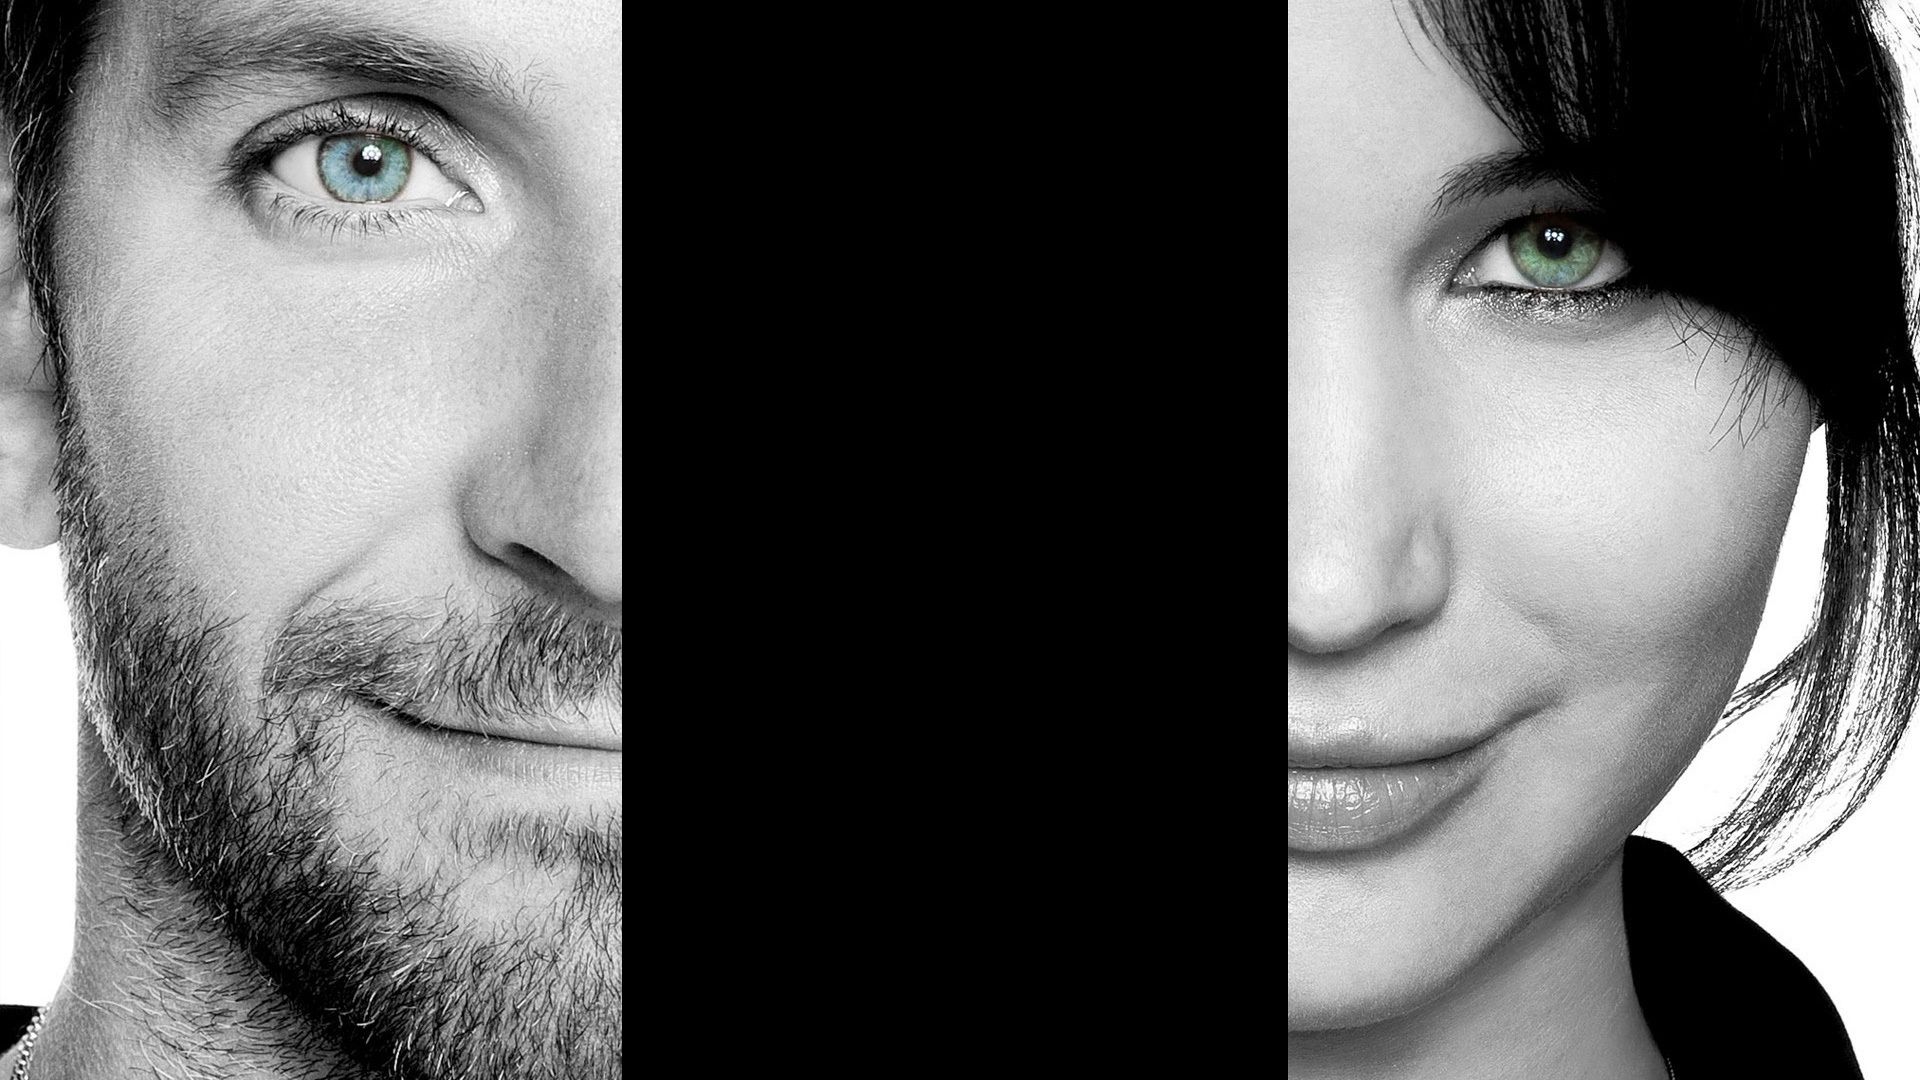 Silver Linings Playbook background